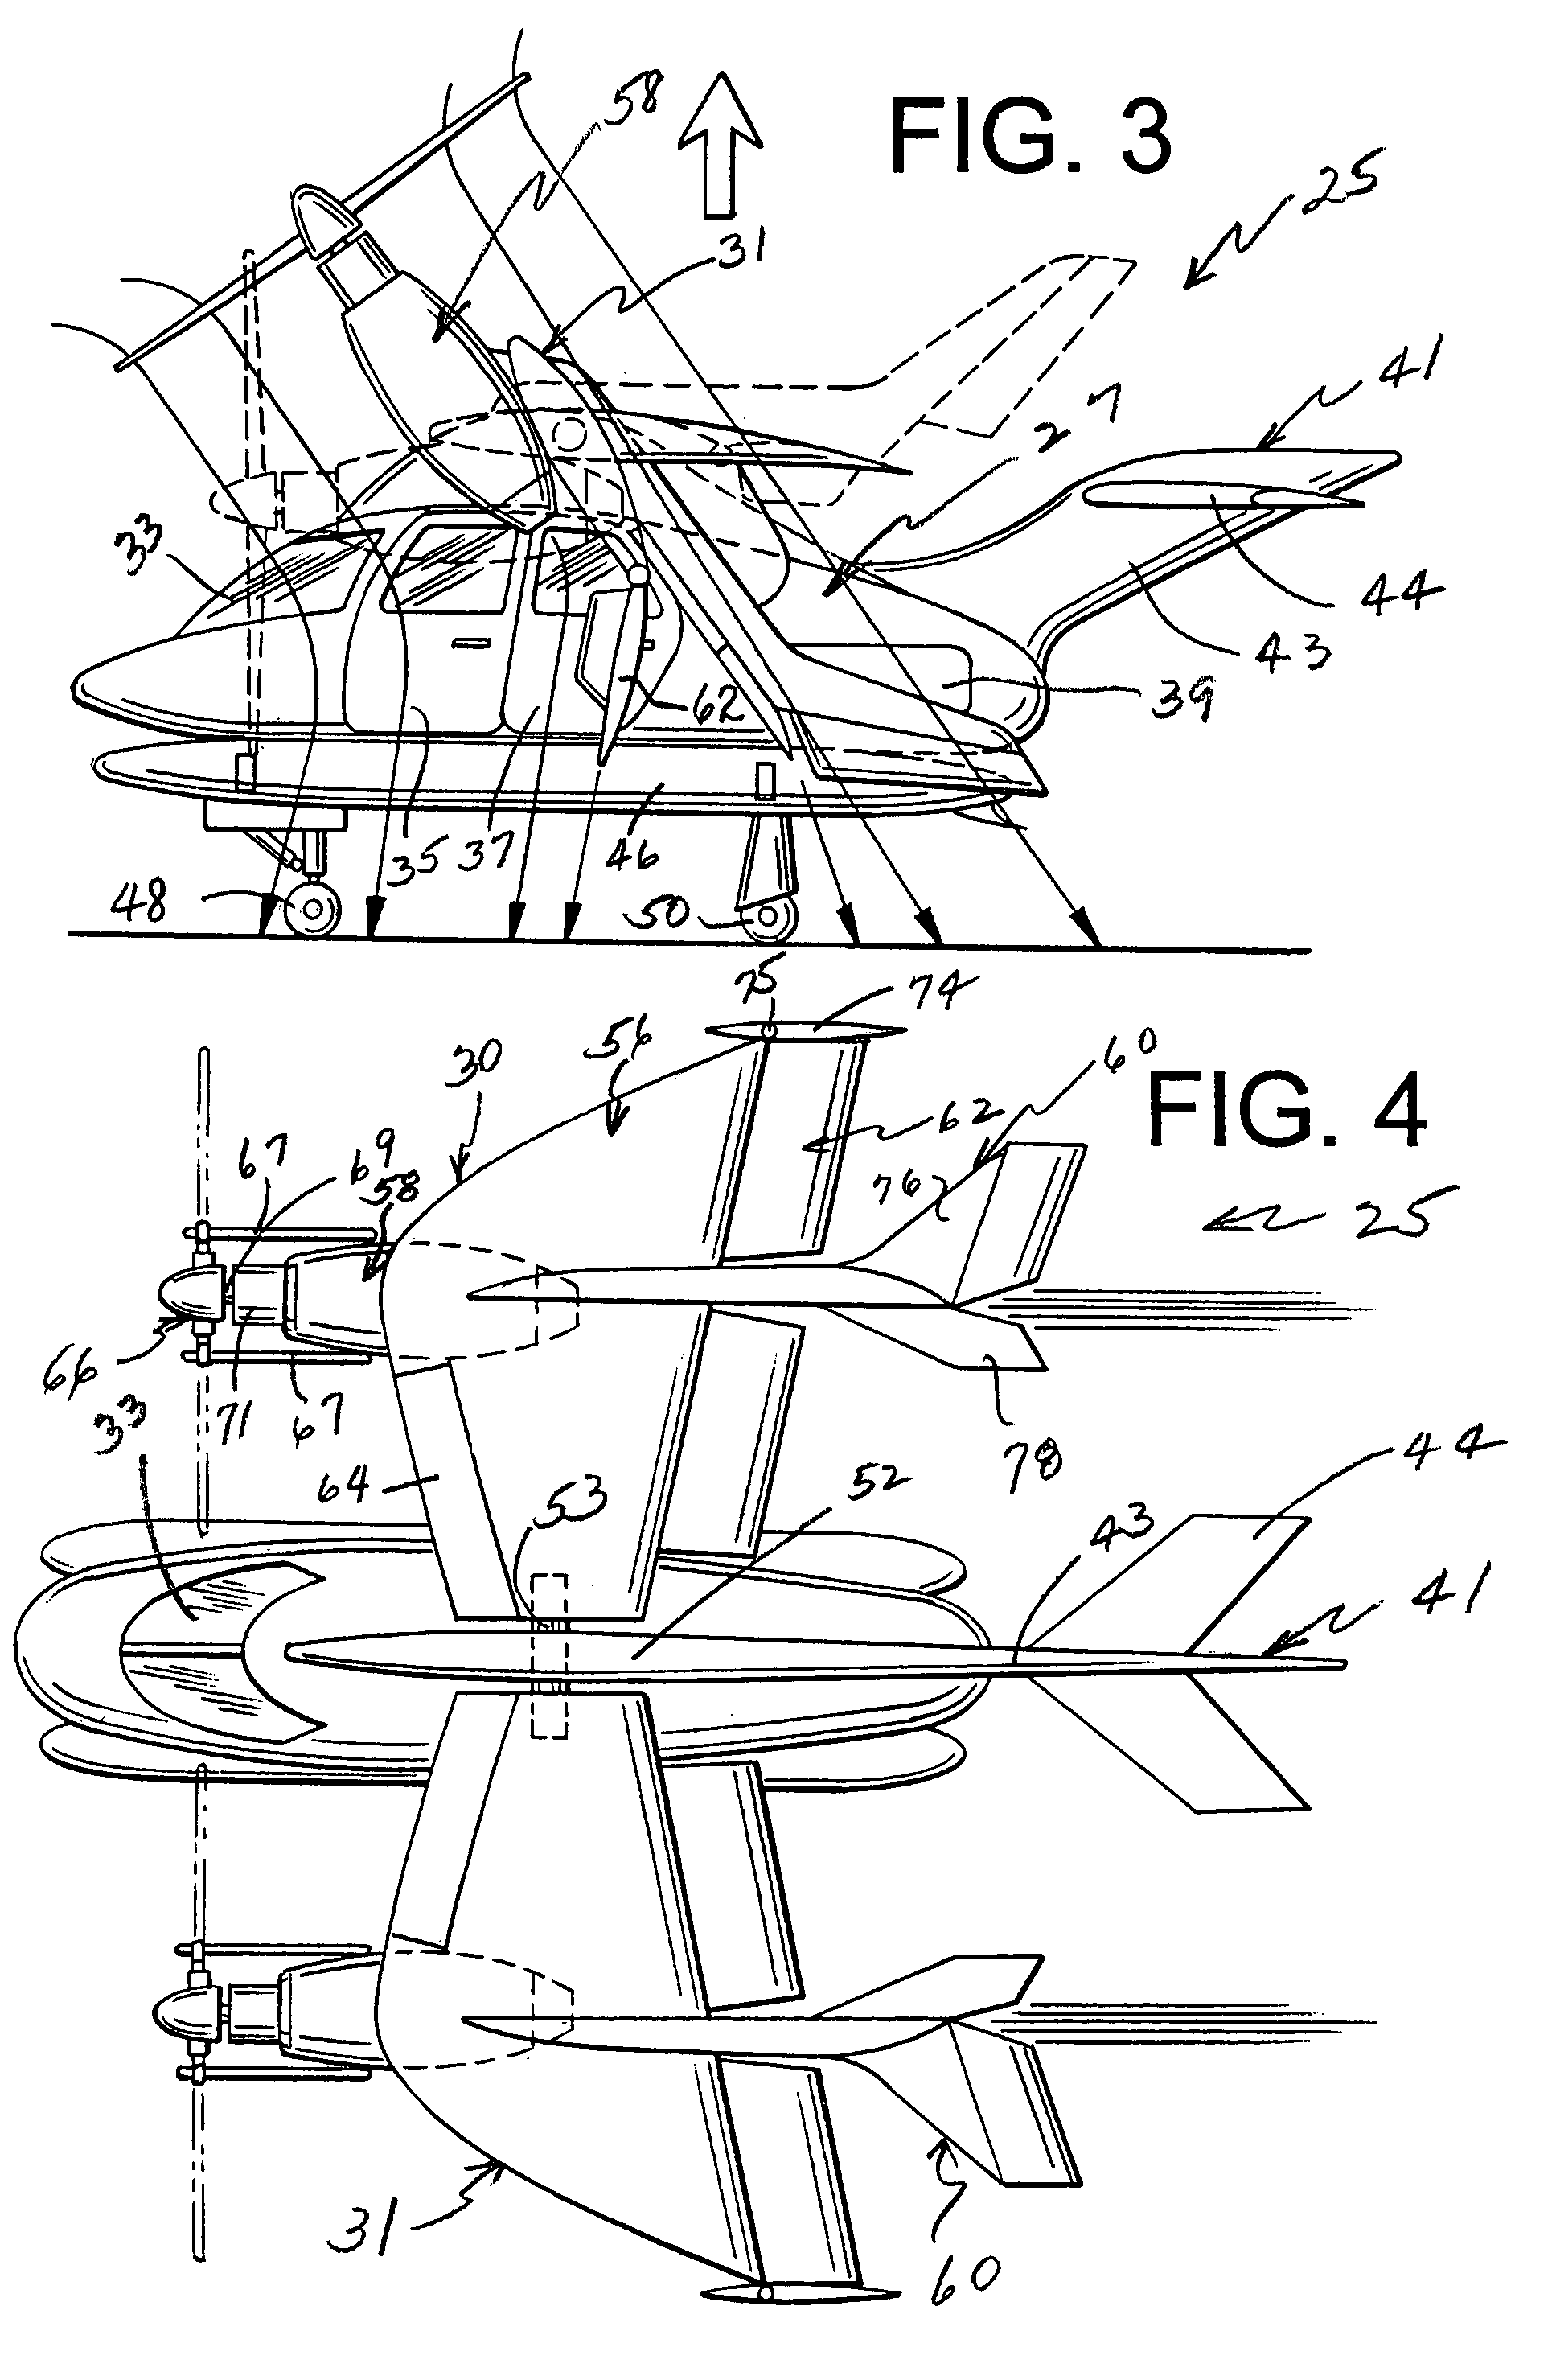 Vertical takeoff and landing aircraft